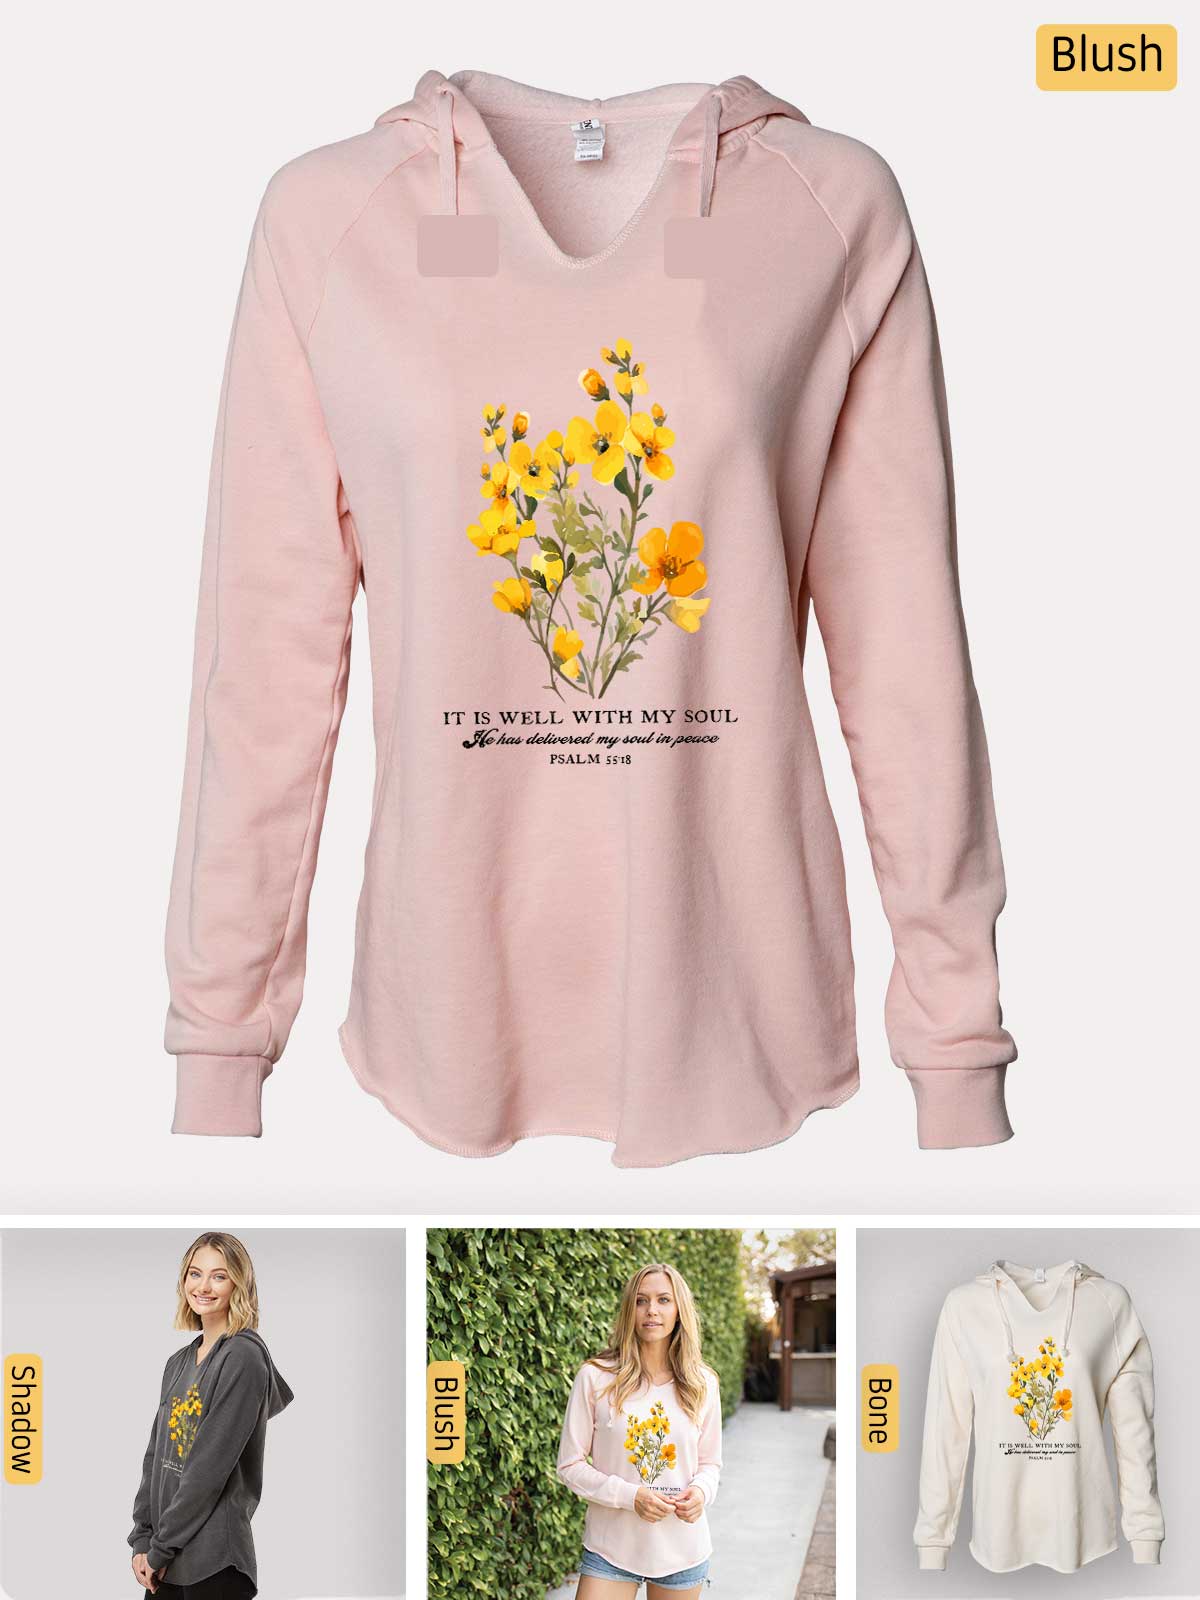 a woman wearing a pink sweatshirt with yellow flowers on it